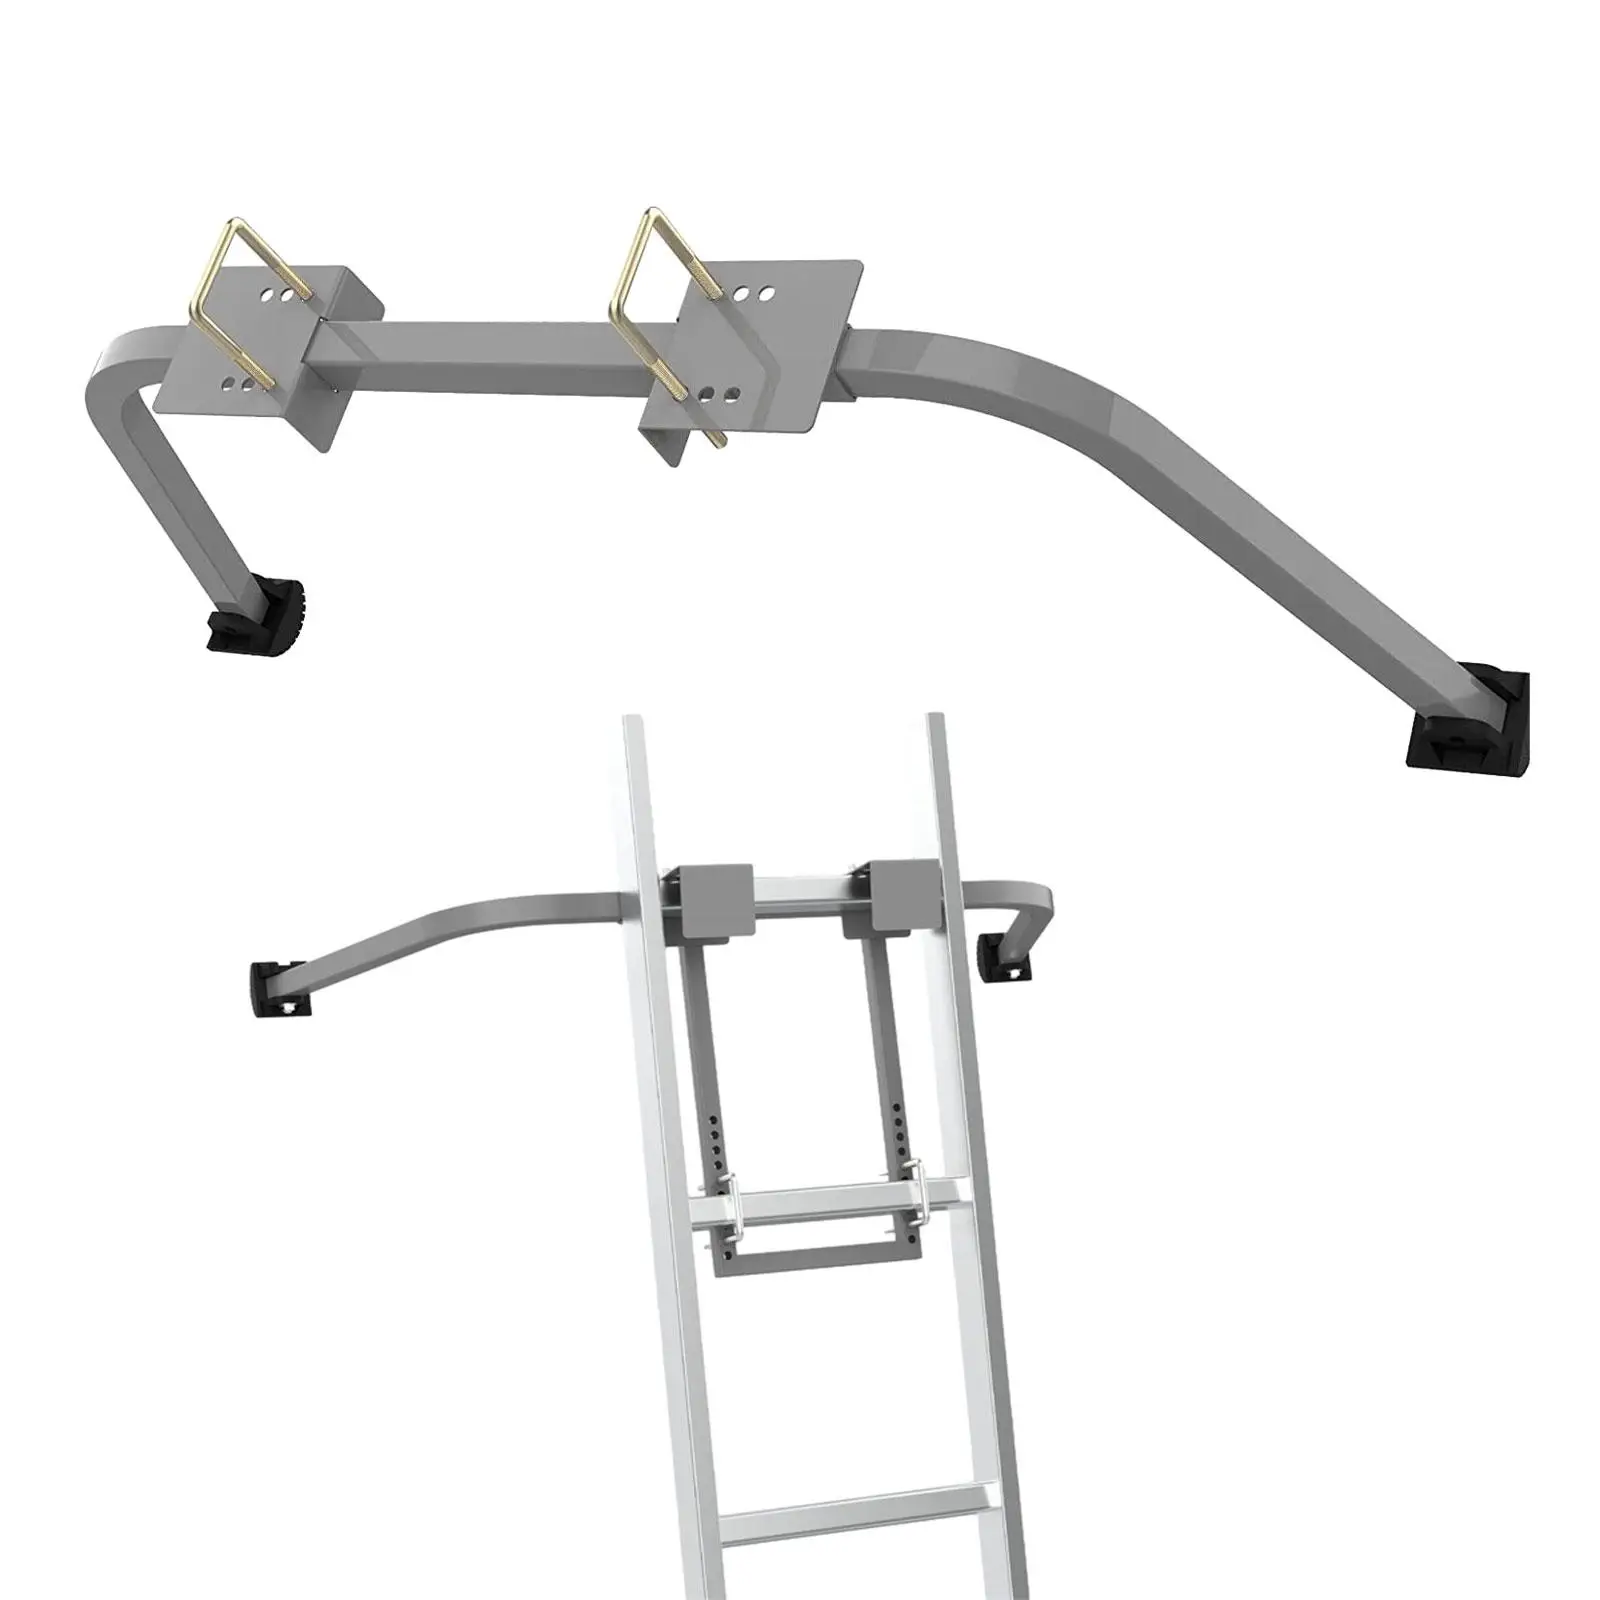 Ladder Stabilizer Accessory Portable Metal Easy to Use Straight Ladder Stabilizer for Projects Working Home Roof Gutter Repair